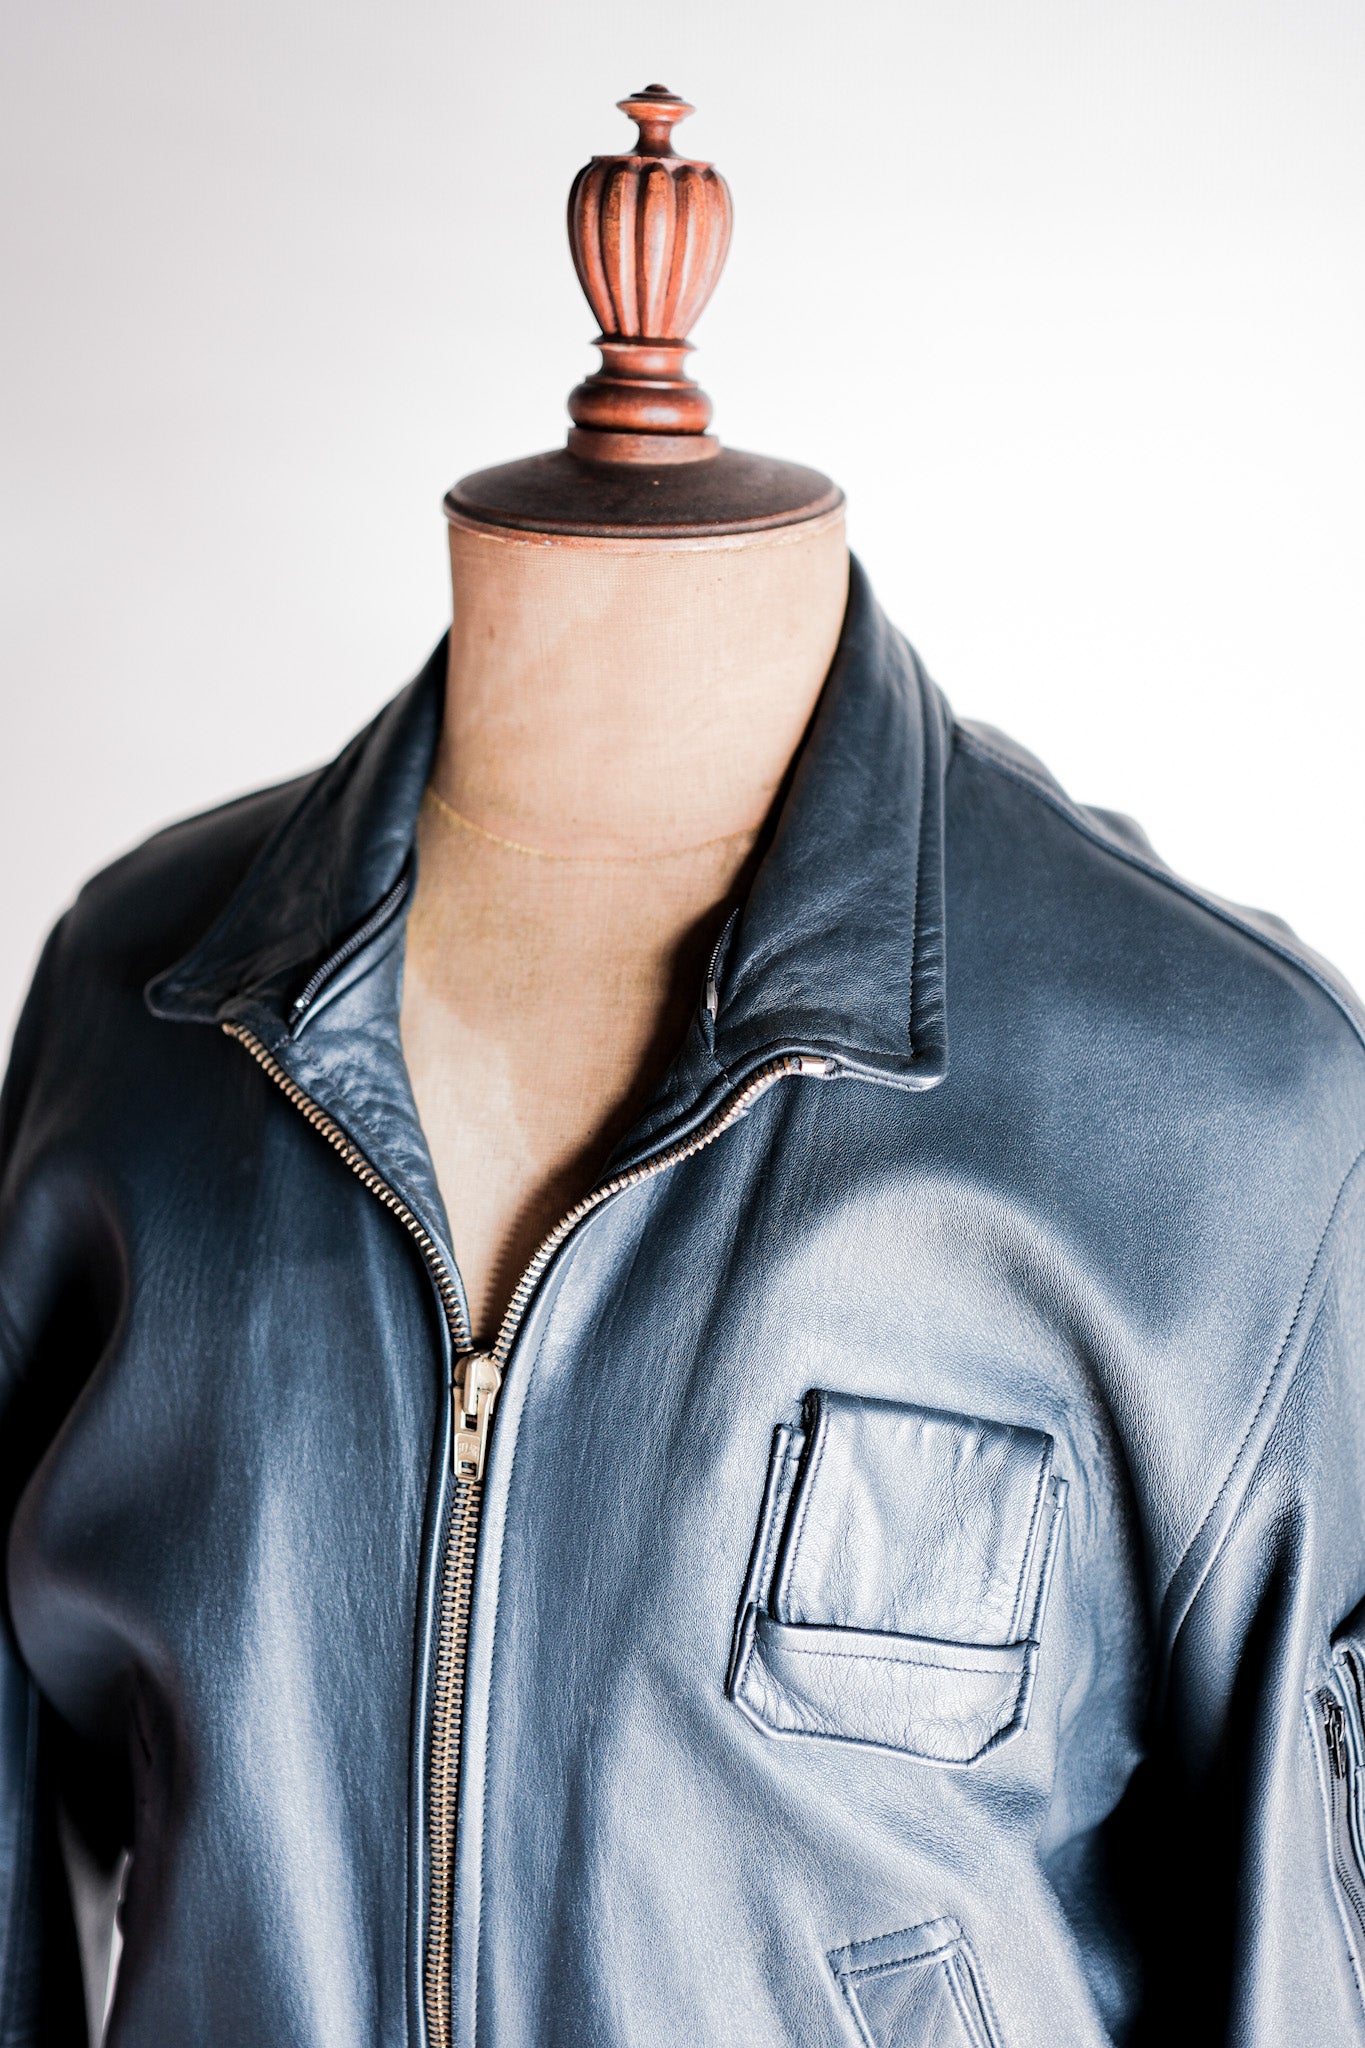 【~70's】French Air Force Pilot Leather Jacket With Chin Strap Size.96M